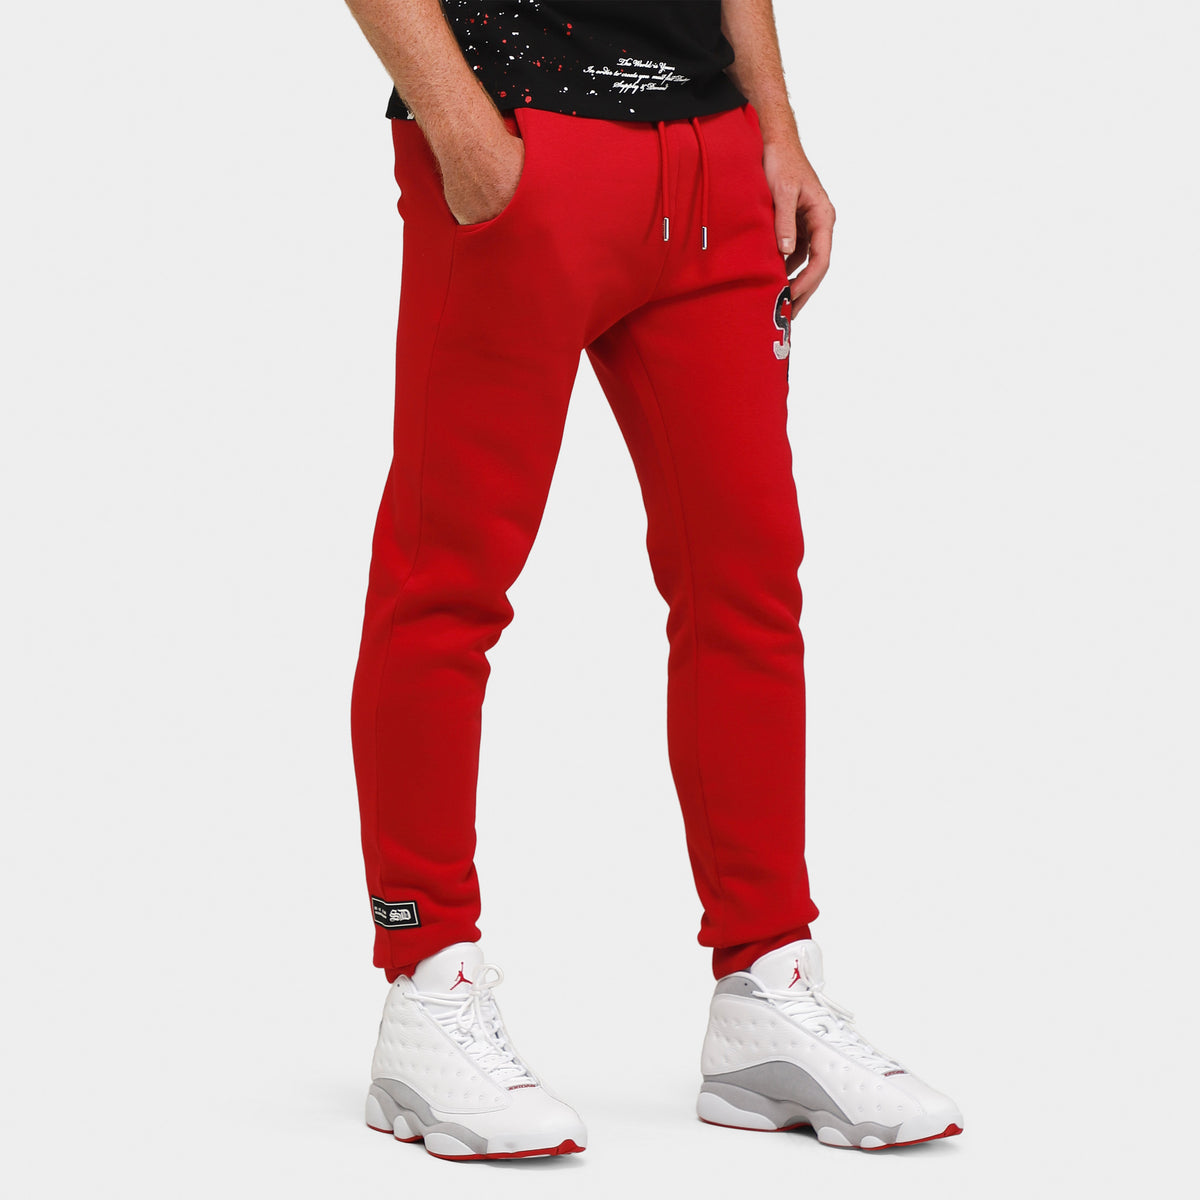 Supply & Demand Trapper Joggers / Jester Red | JD Sports Canada